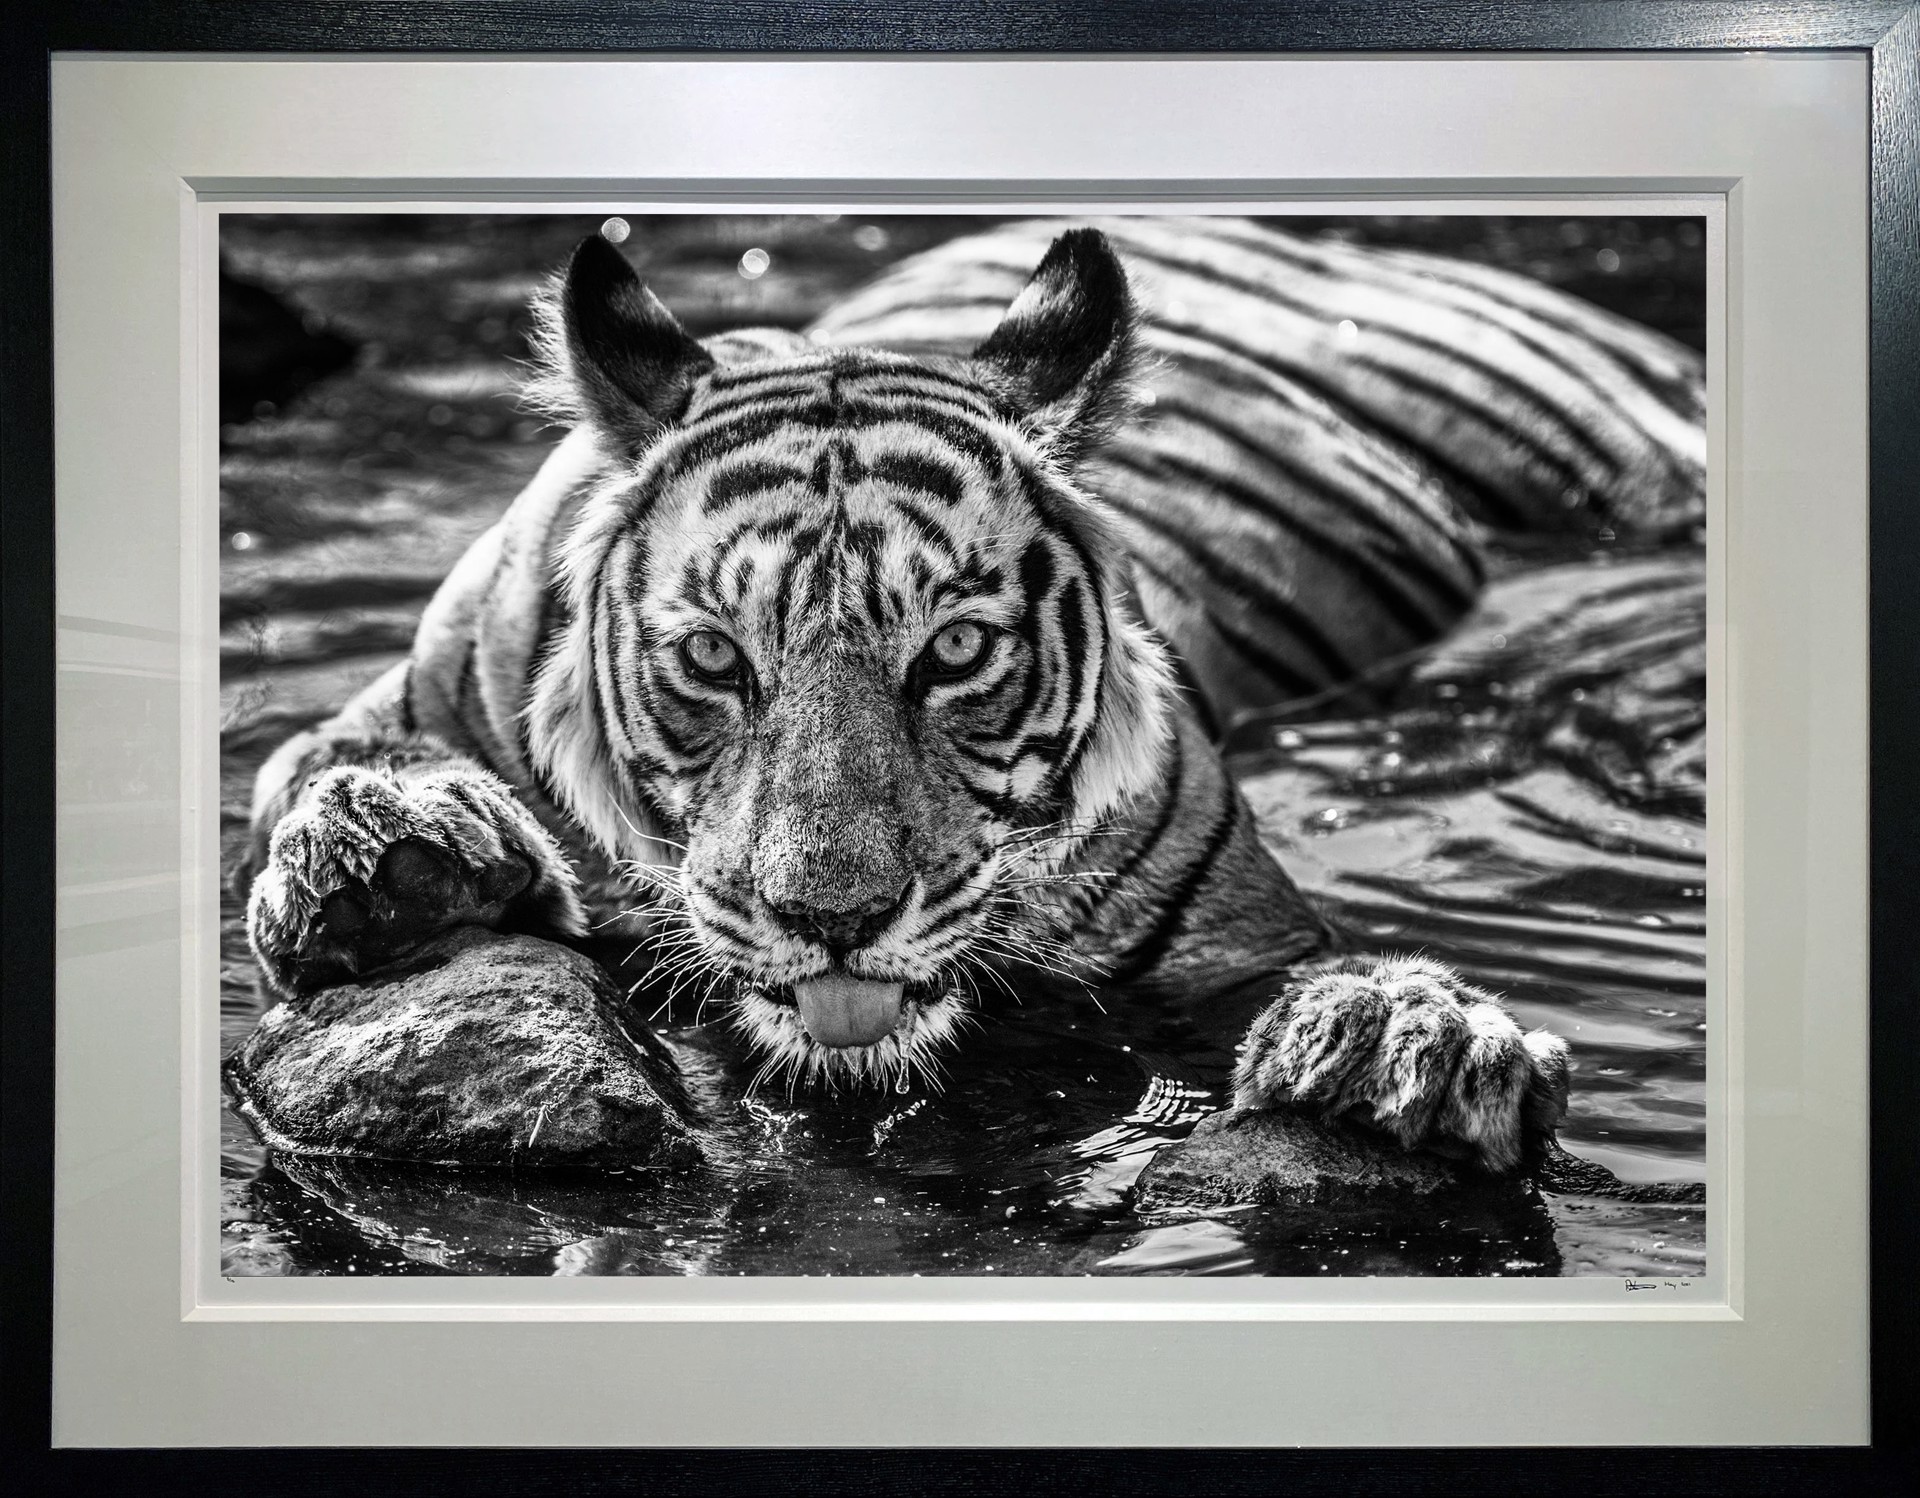 The Queen of Ranthambore by David Yarrow